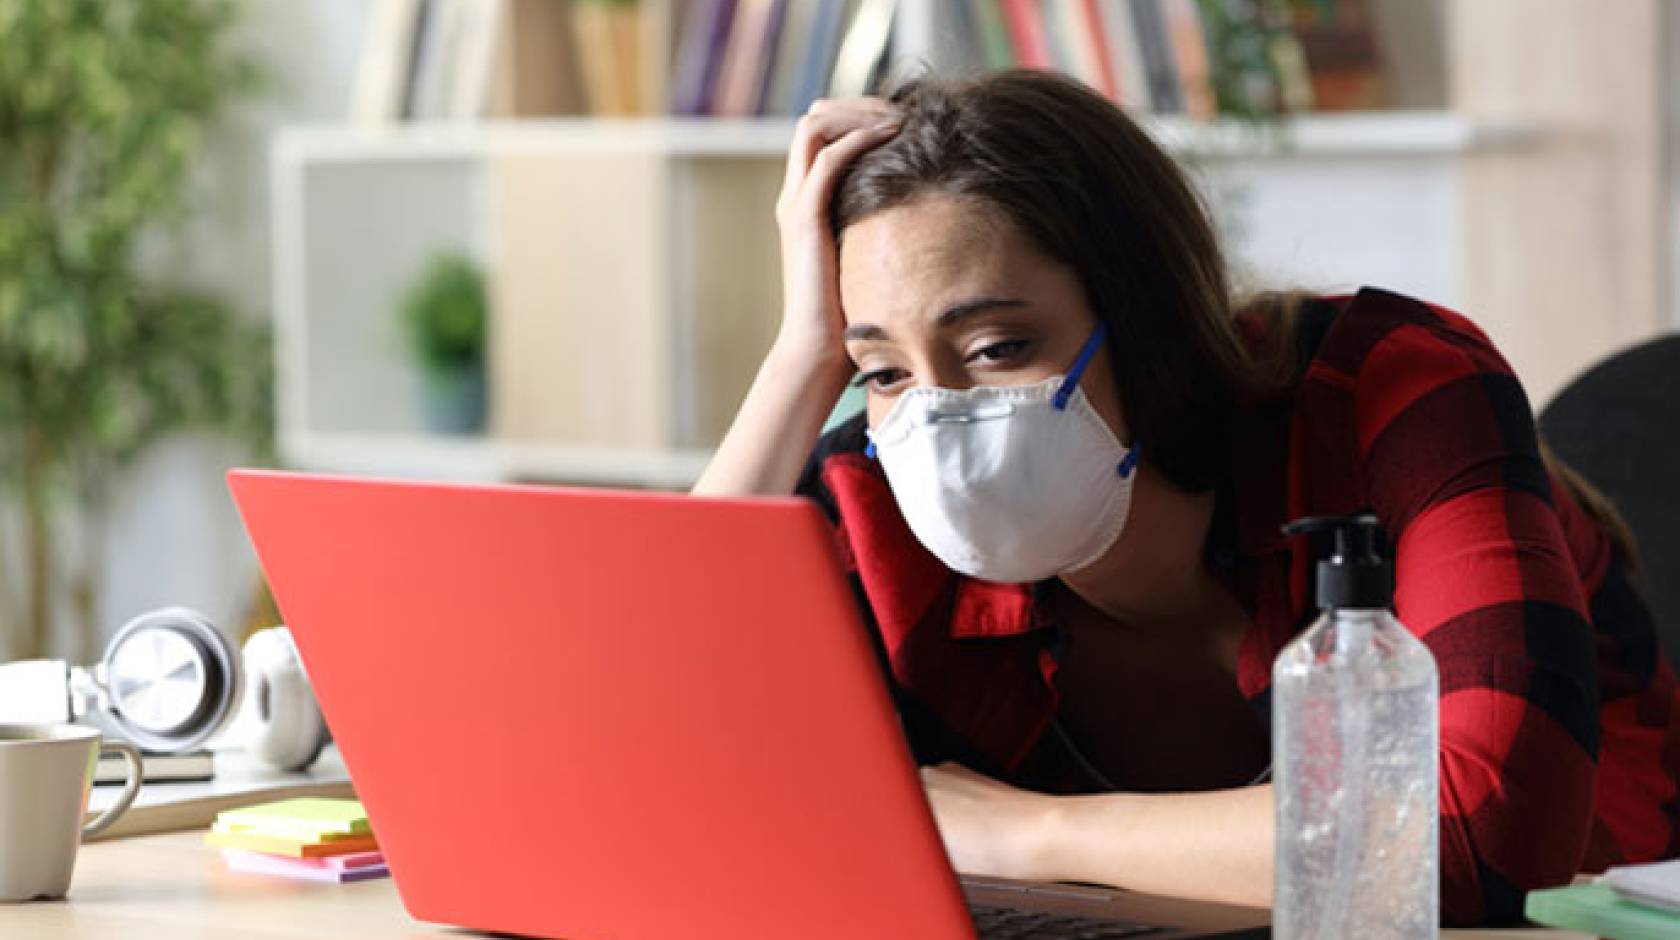 Student in mask looks at computer, bored